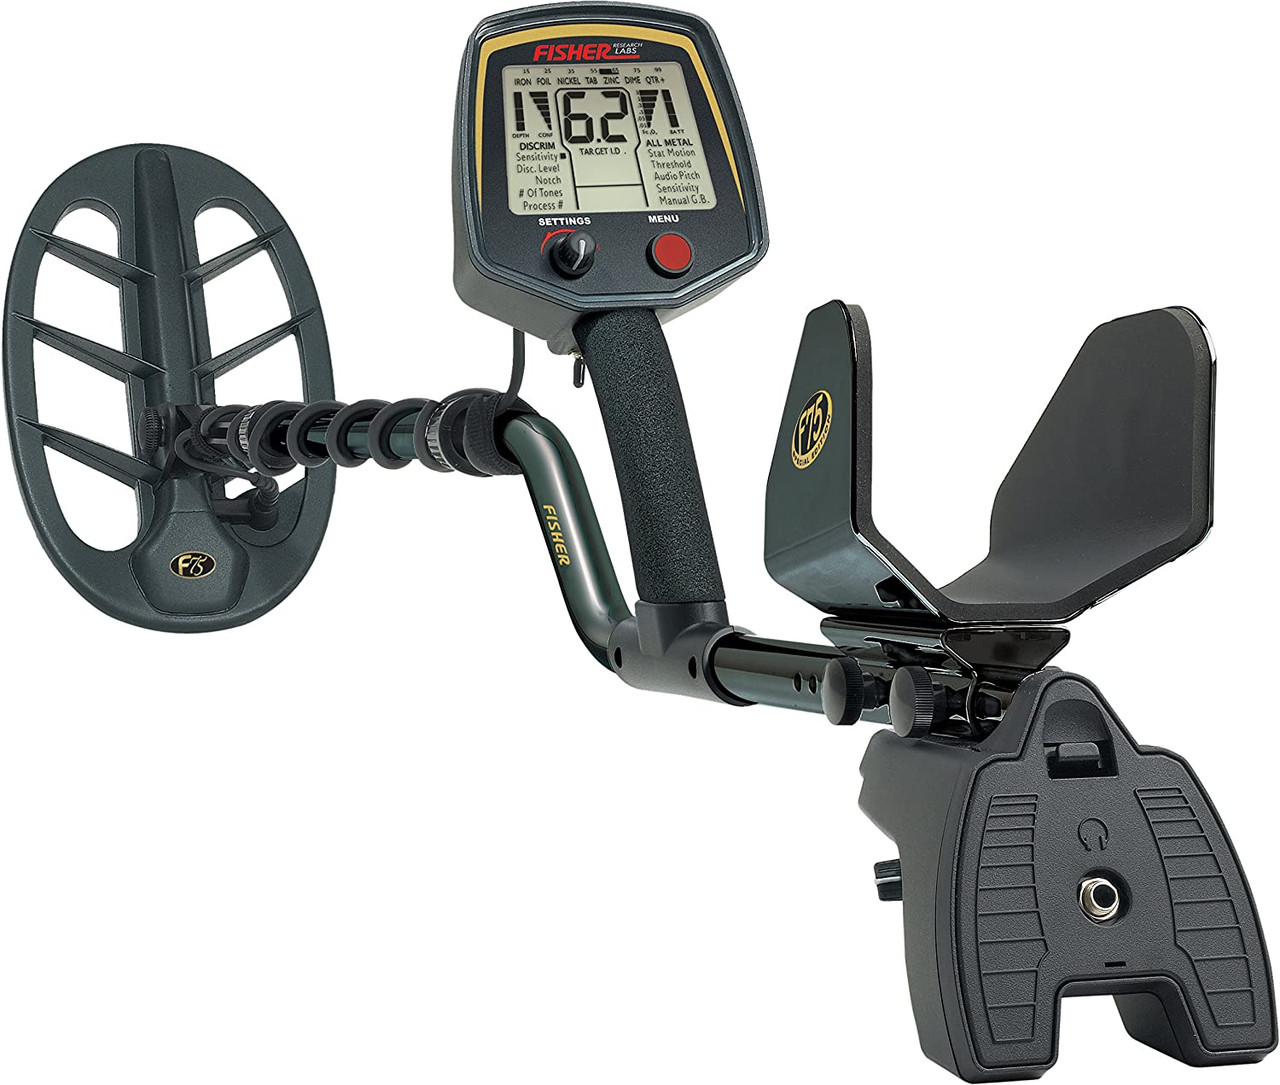 Fisher F75 Special Edition LTD Metal Detector by Kellyco